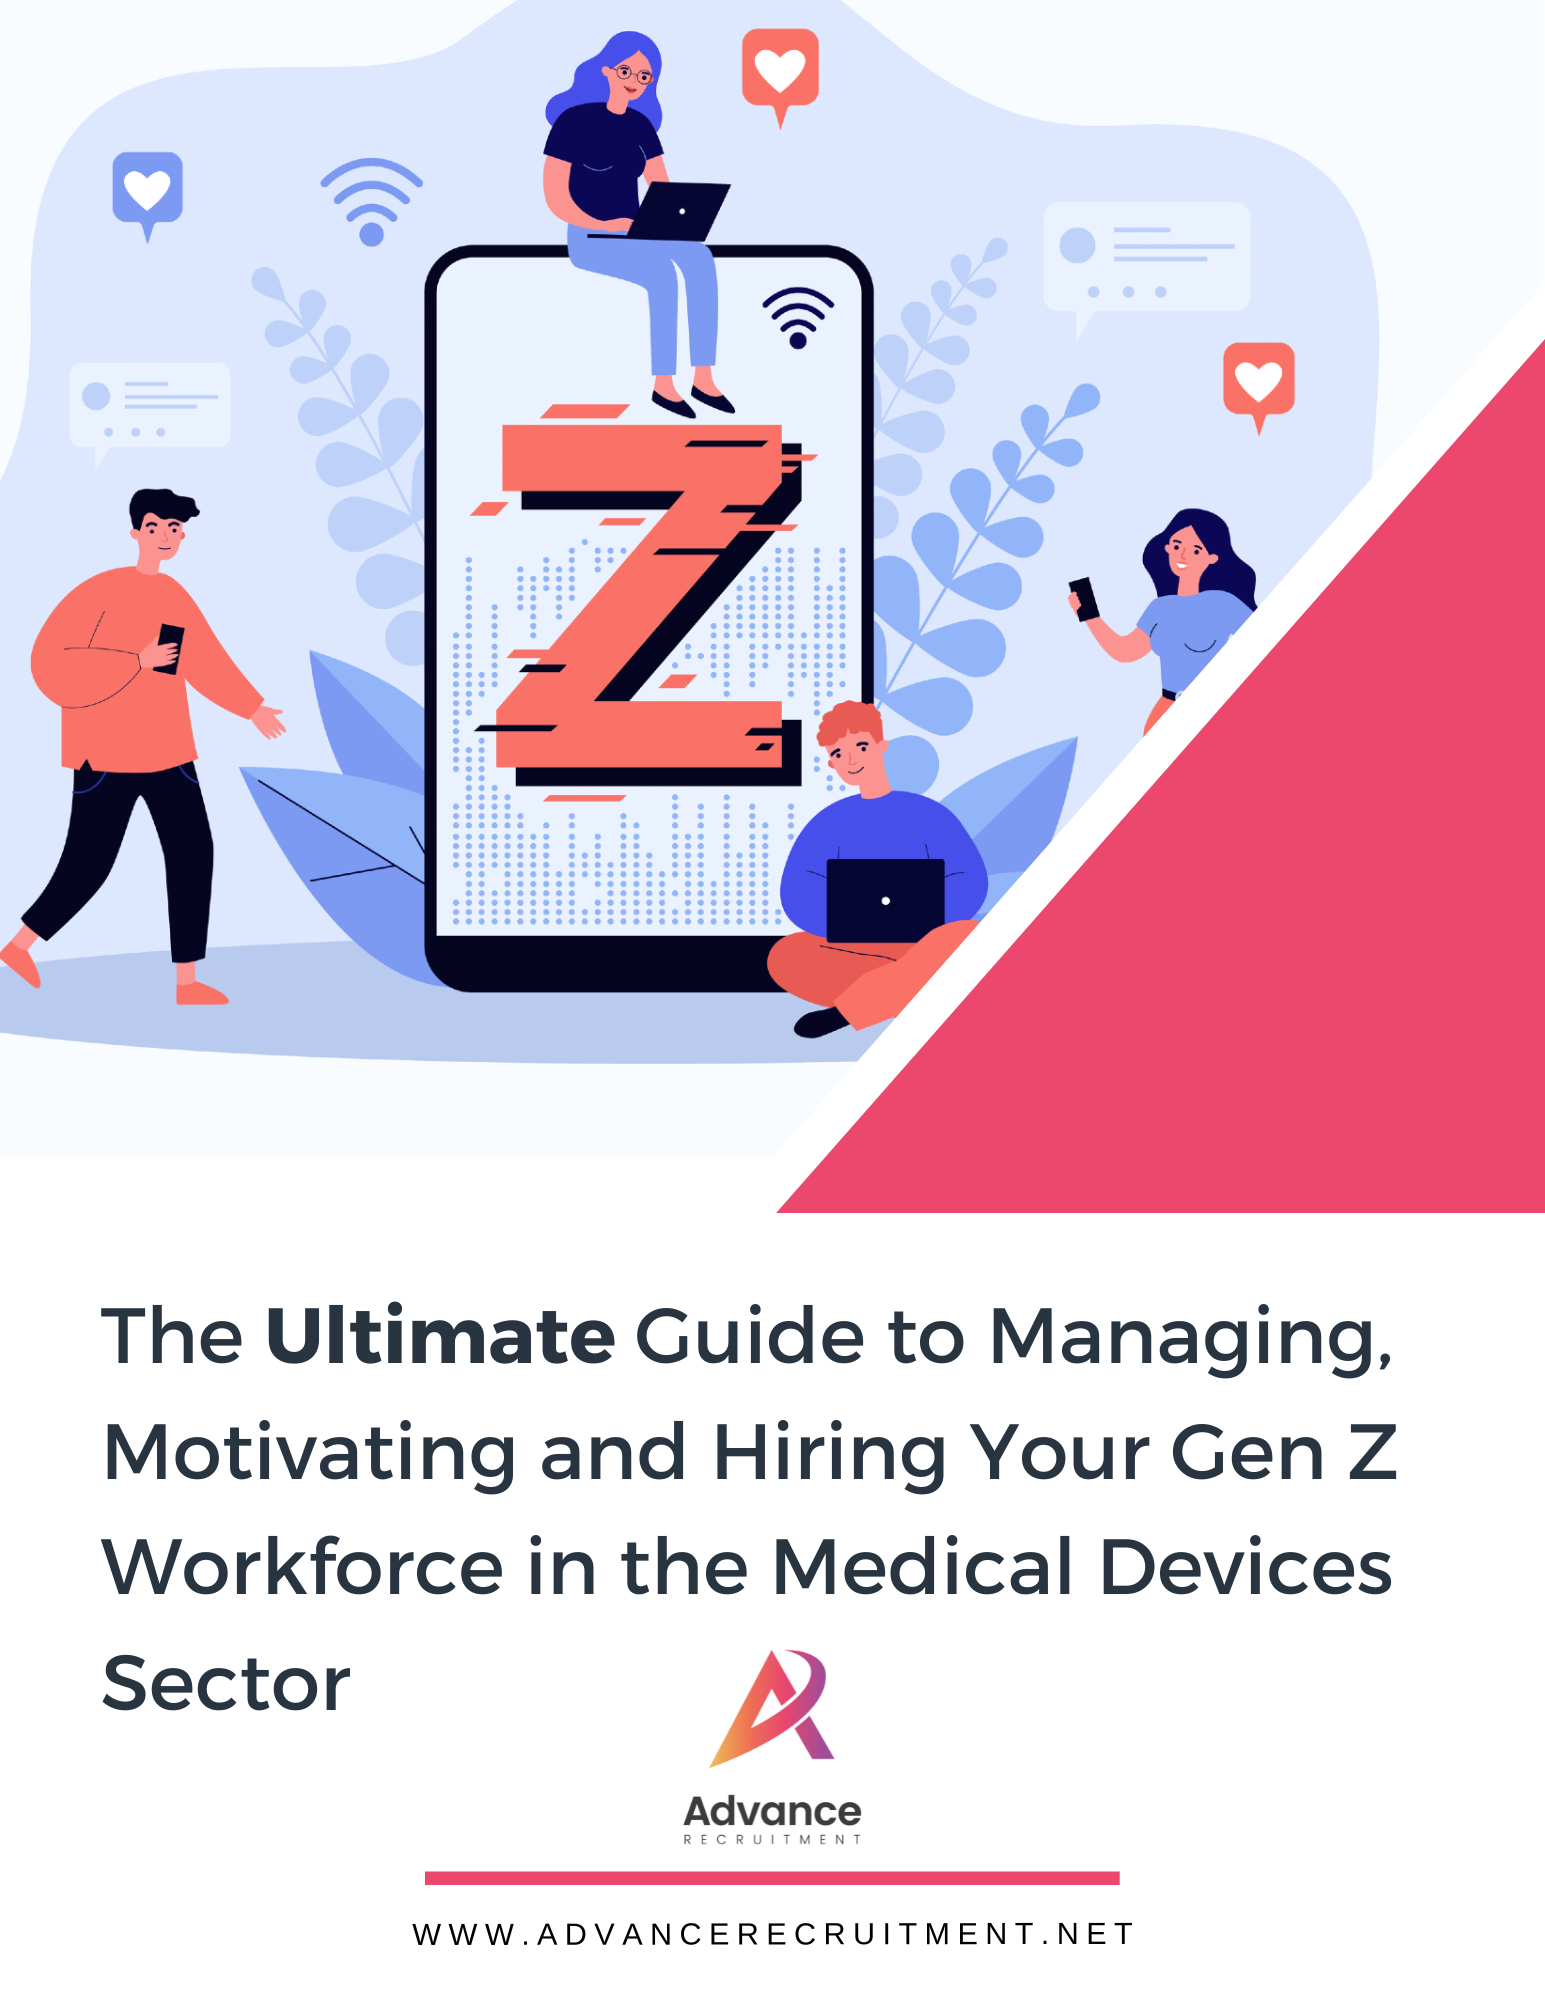 The Ultimate Guide to Managing, Motivating and Hiring Your Gen Z Workforce in Medical Devices